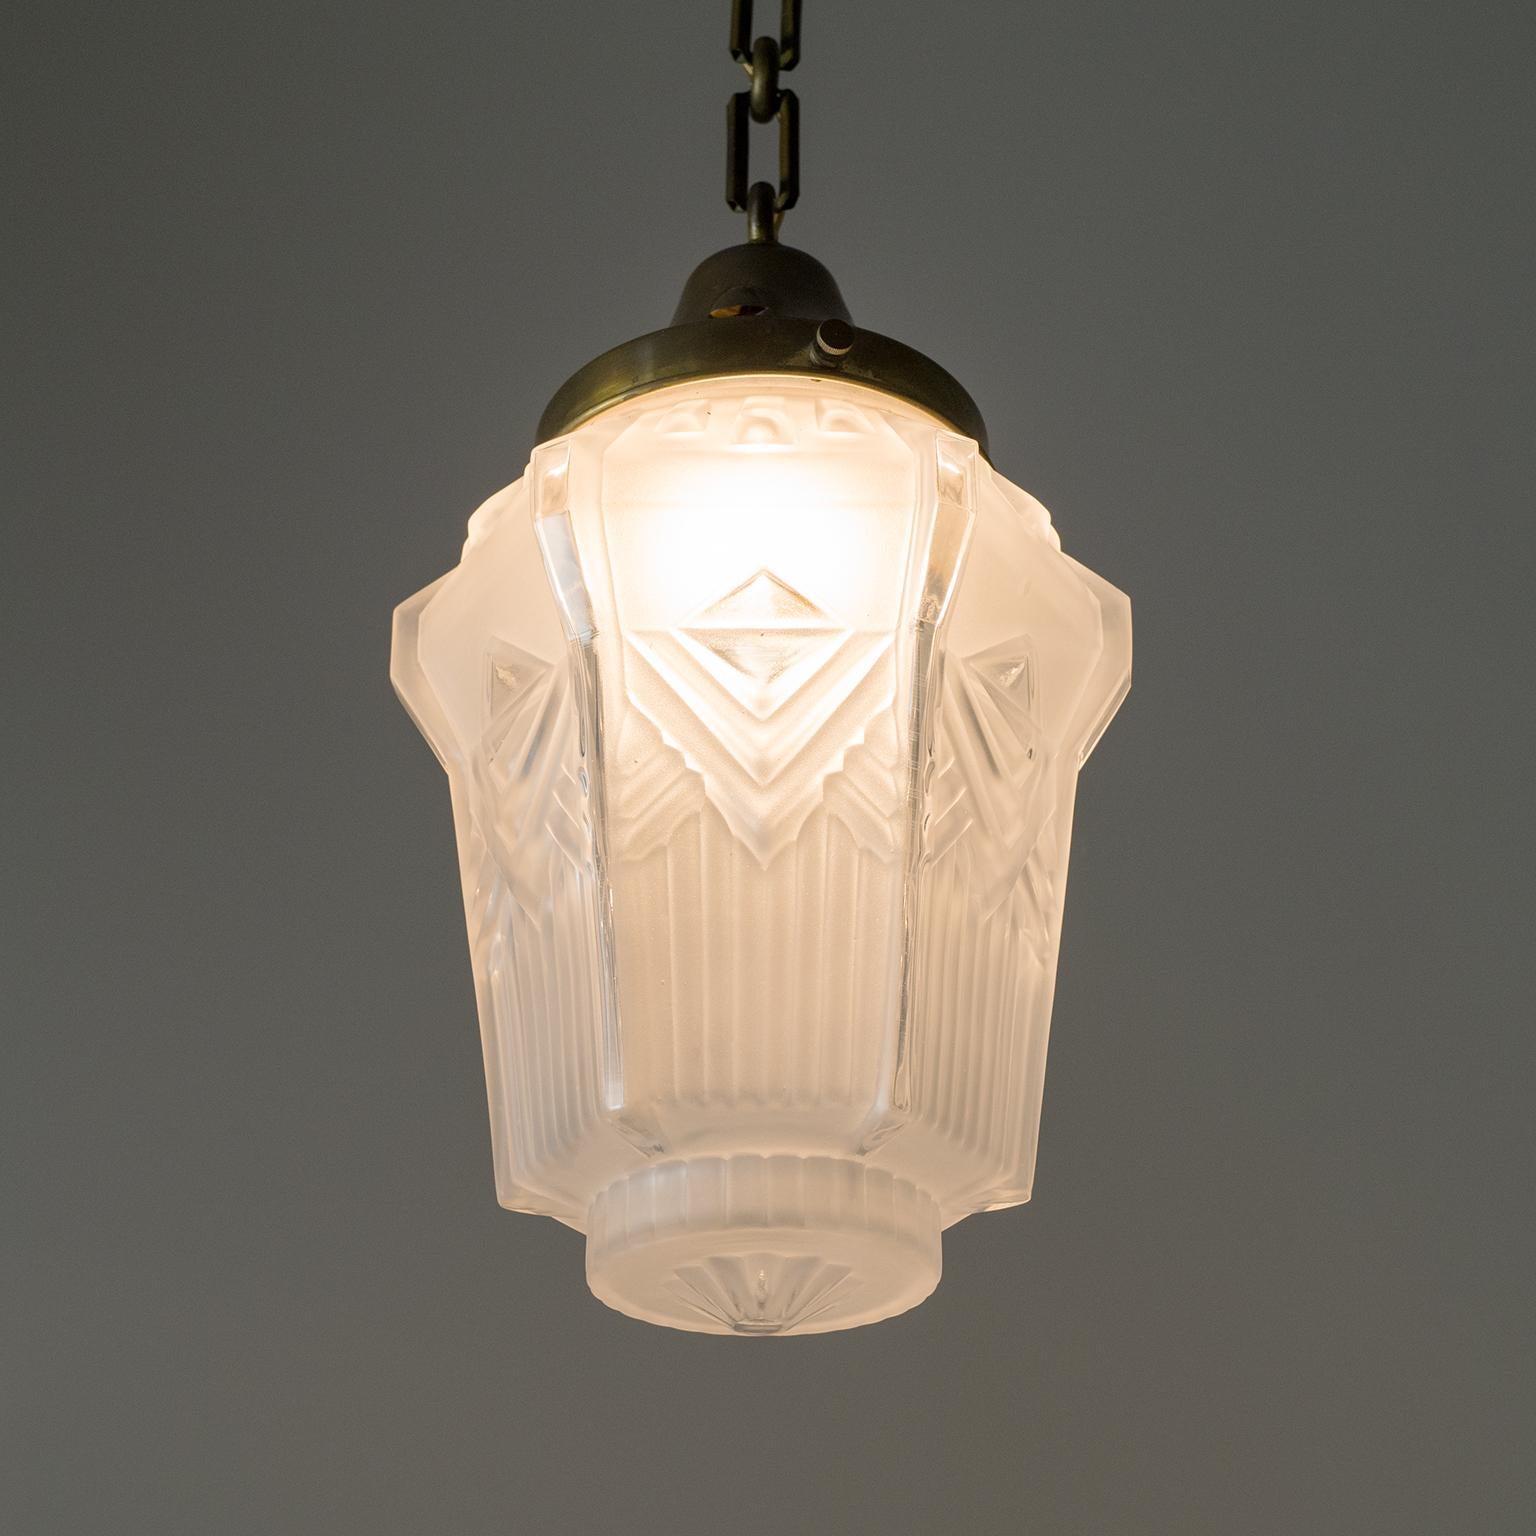 Early 20th Century 1920s French Art Deco Pendant, Brass and Geometric Glass